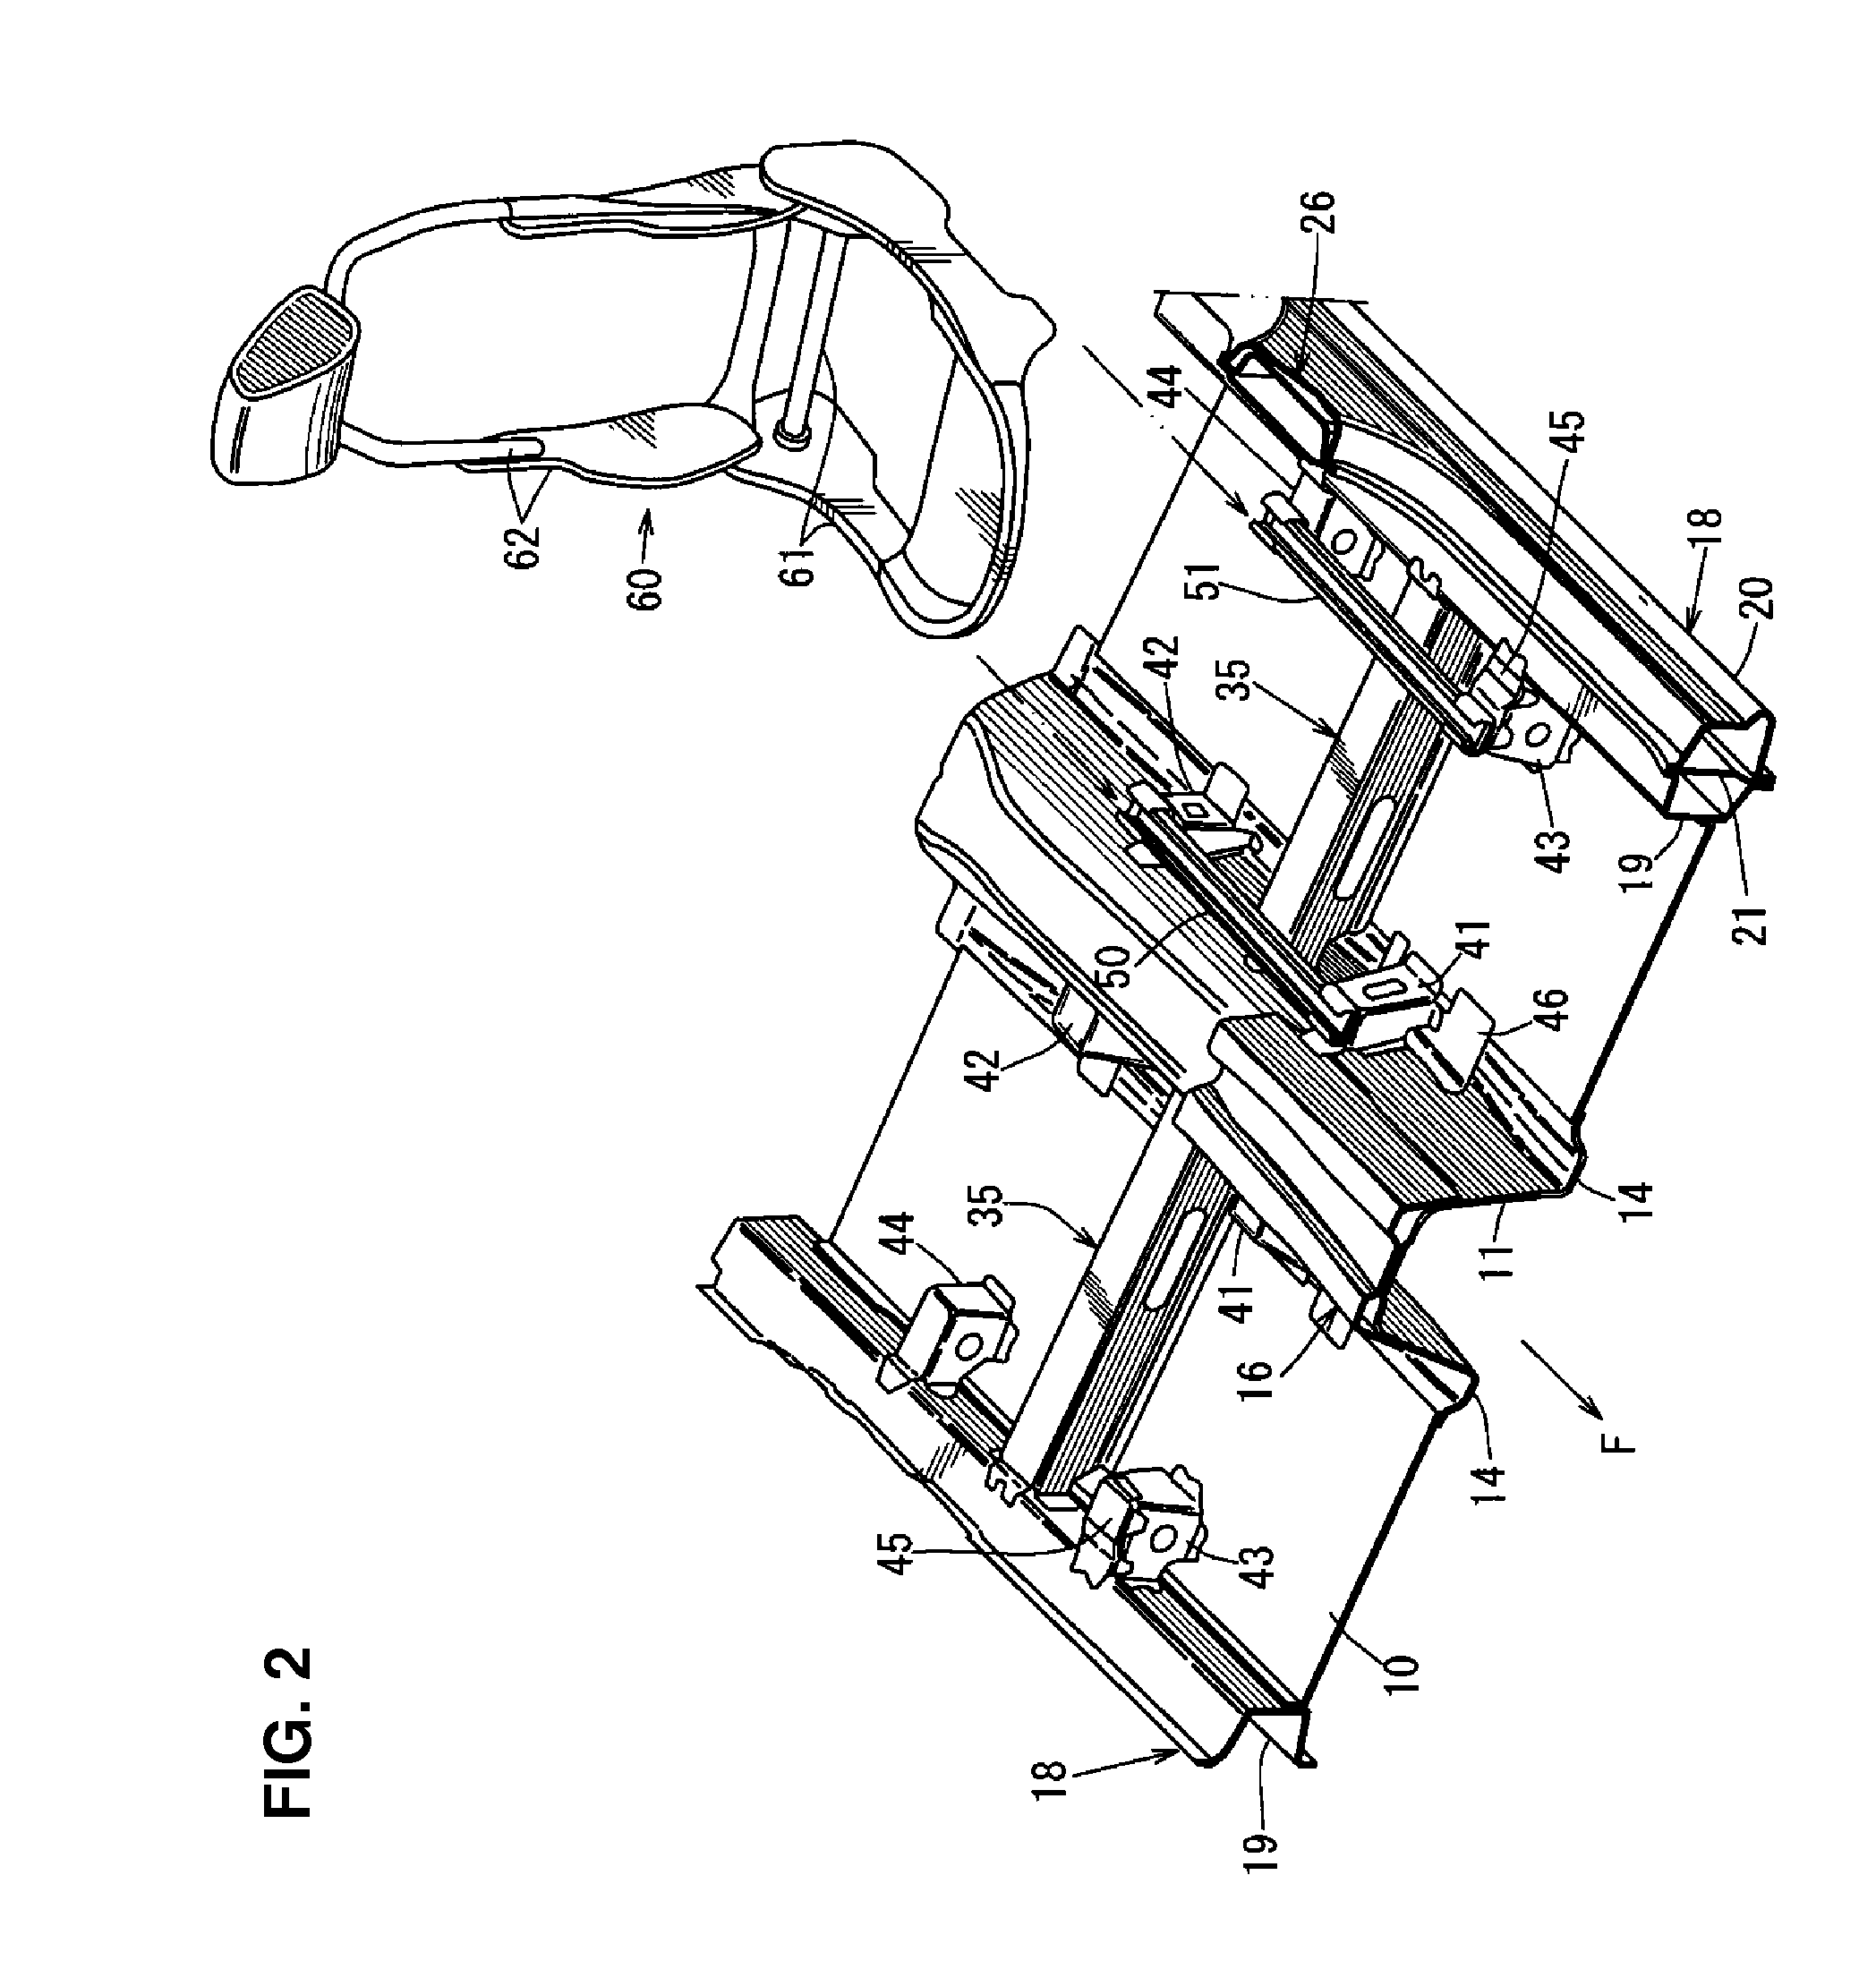 Lower vehicle-body structure of automotive vehicle